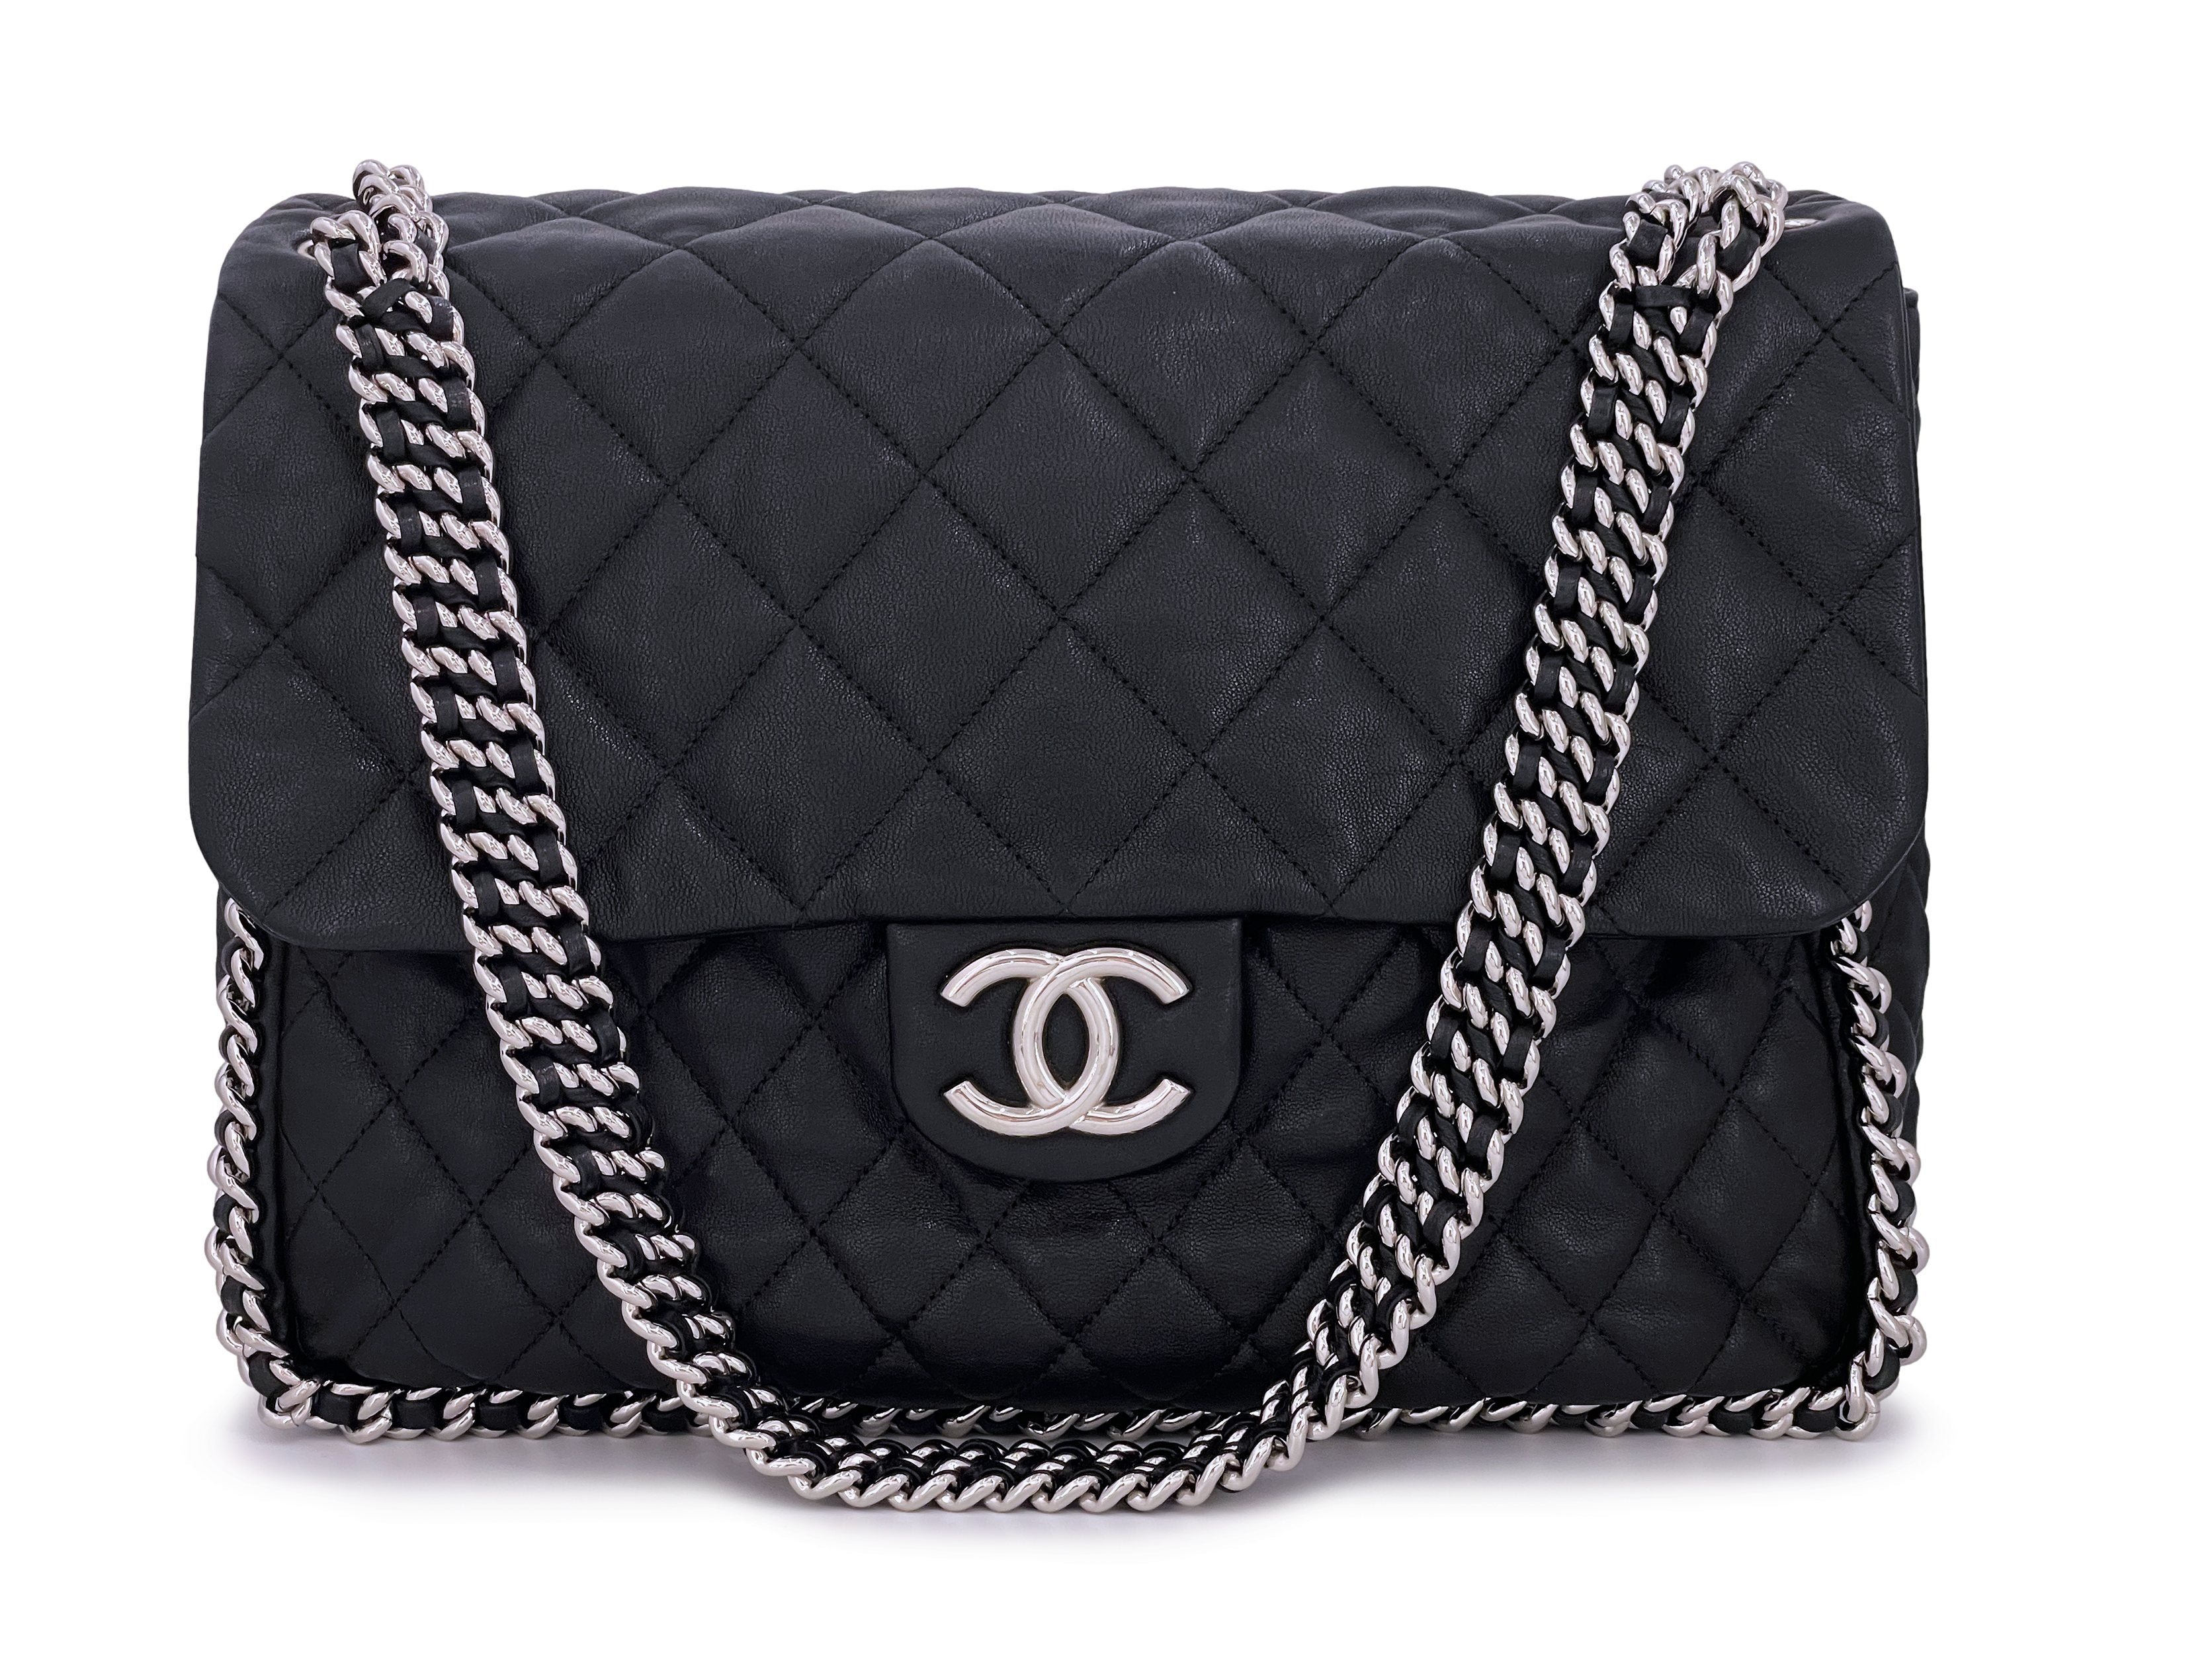 Chanel Leather Hobo Bags for Women